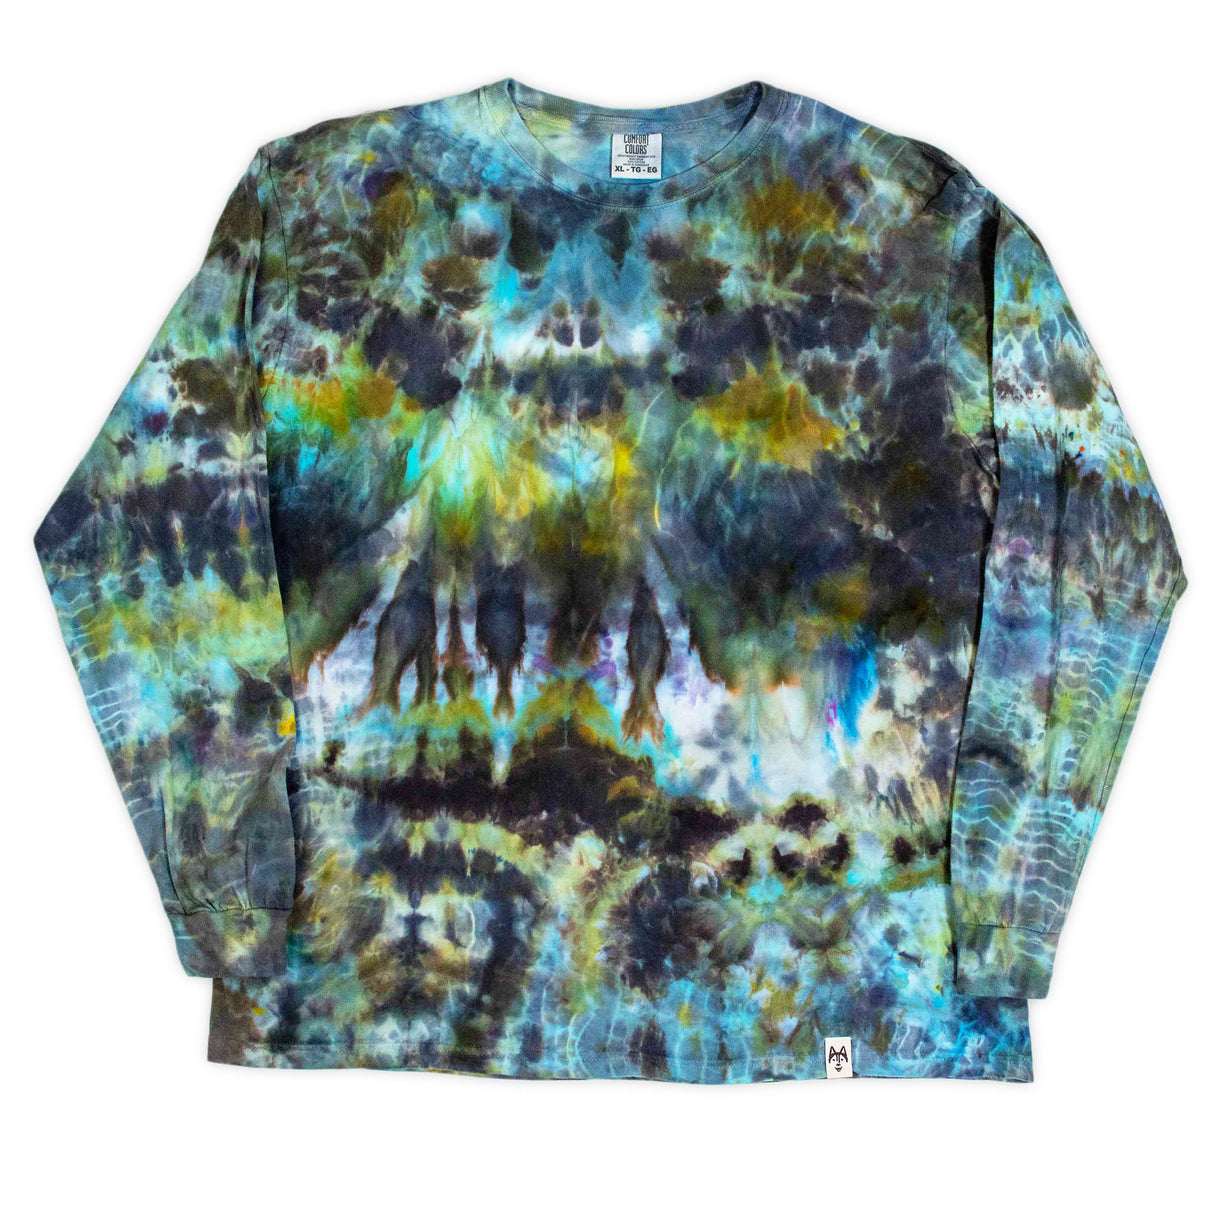 An ice dye long sleeve t-shirt that combines the tranquility of blue and green hues in a soft, inviting fabric perfect for cooler days.